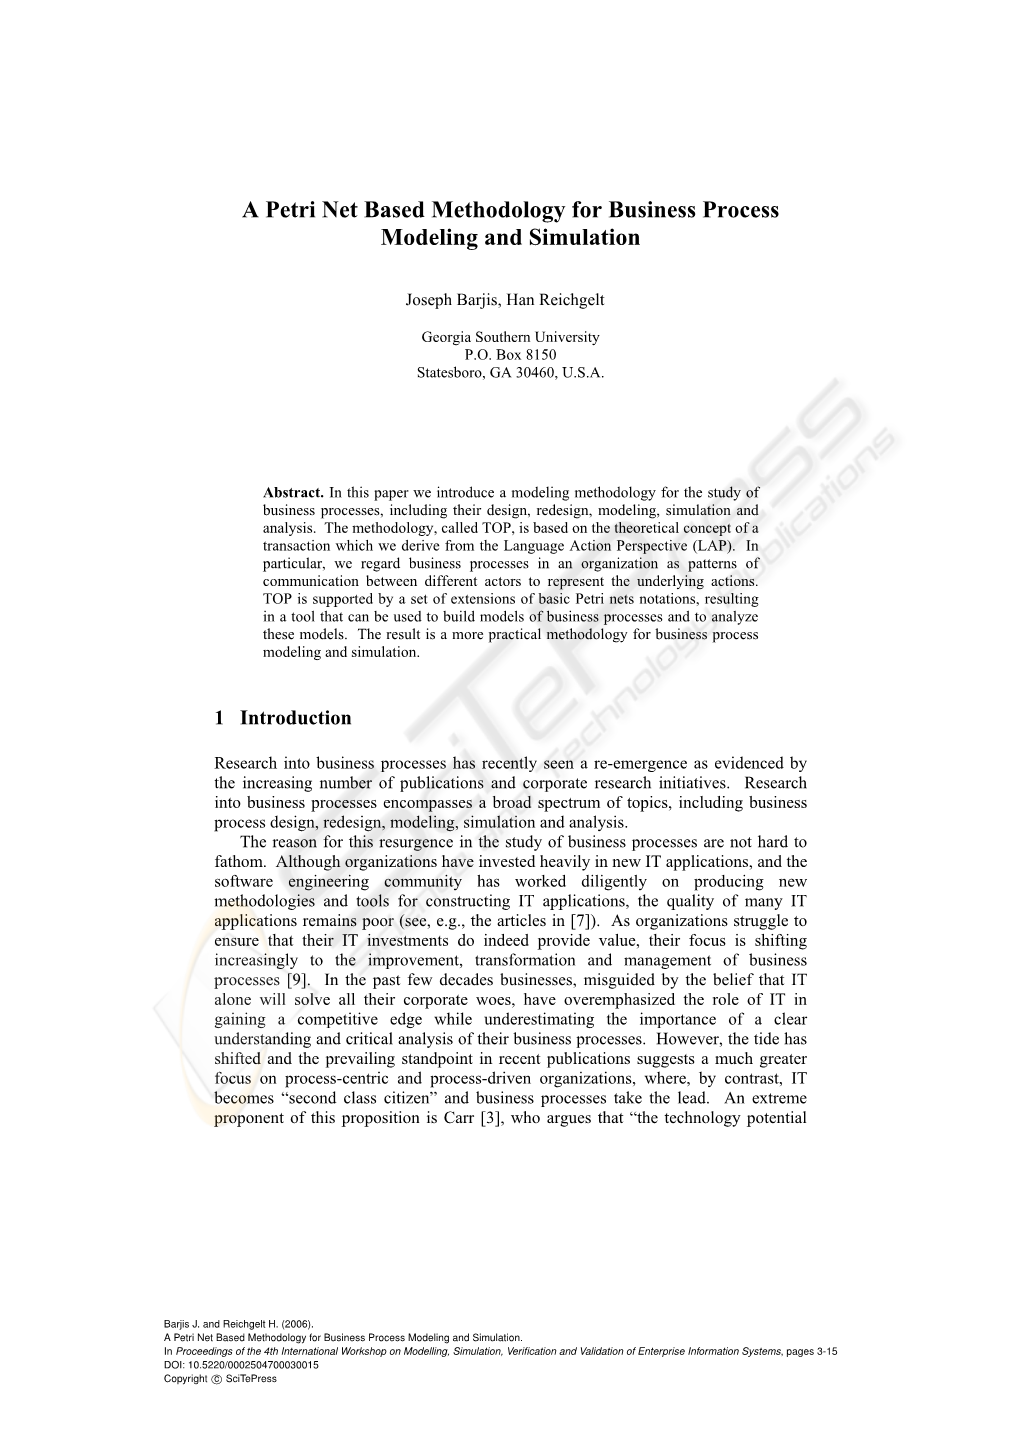 A Petri Net Based Methodology for Business Process Modeling and Simulation